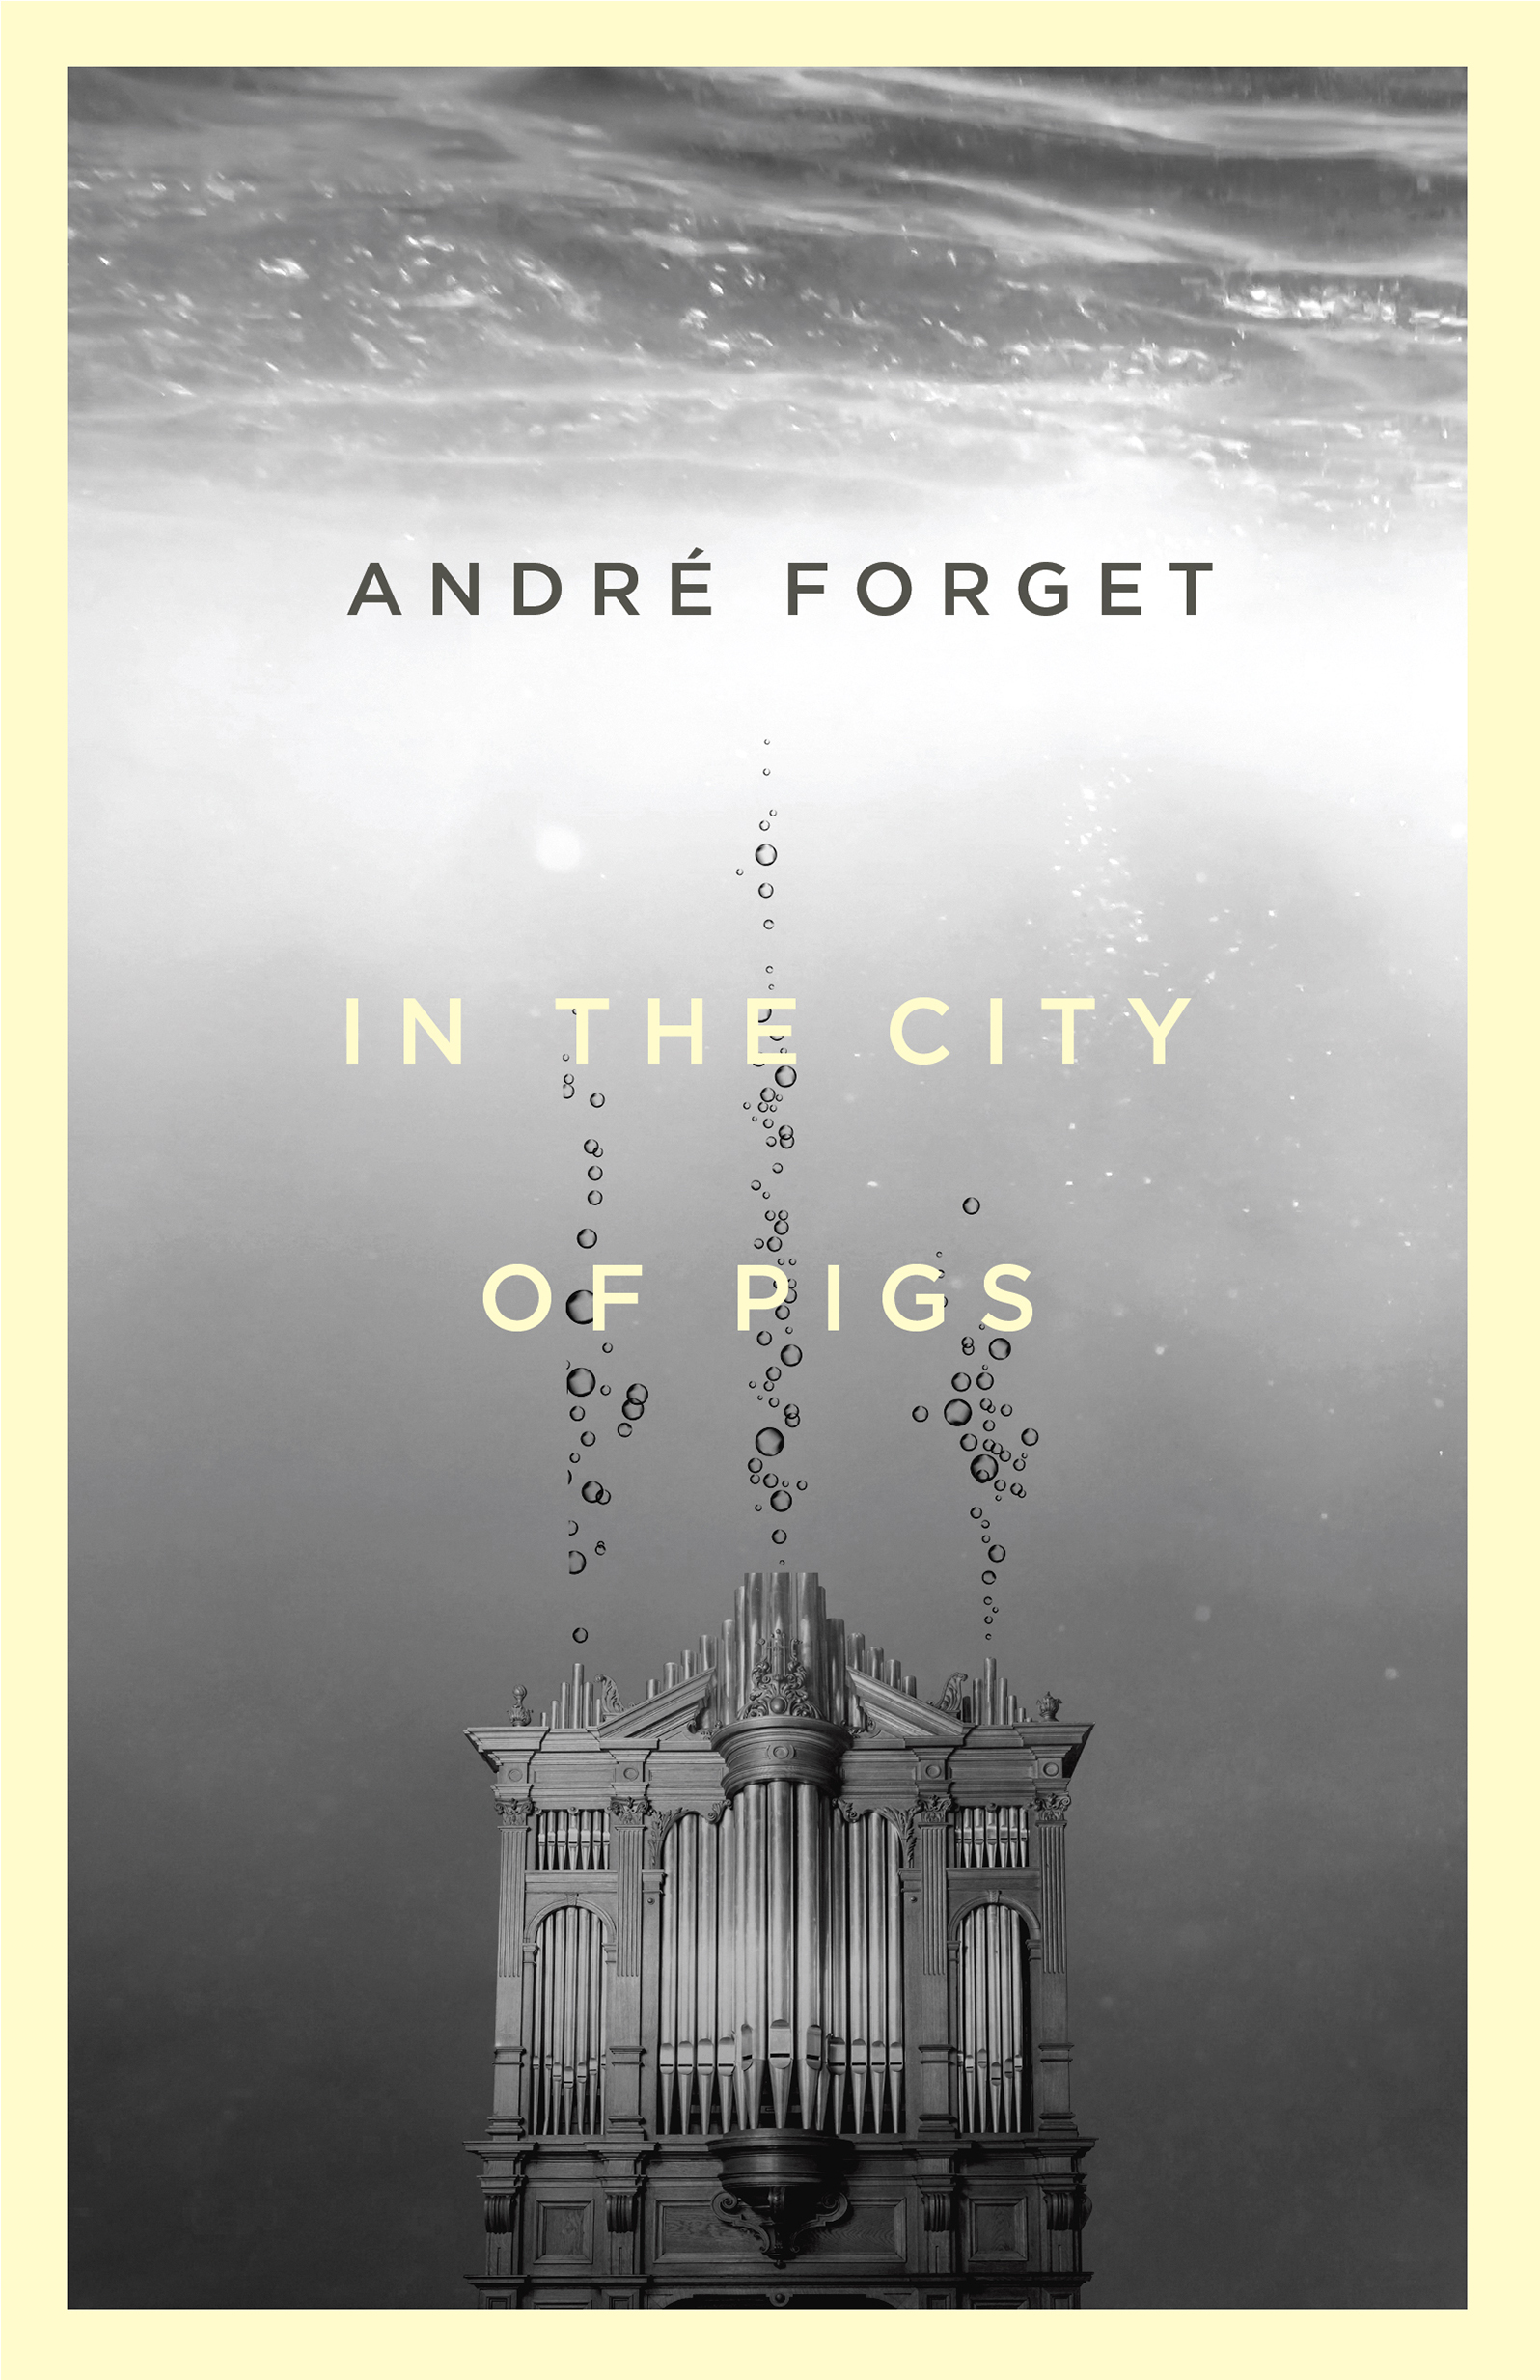 Andre Forget's In the City of Pigs book cover